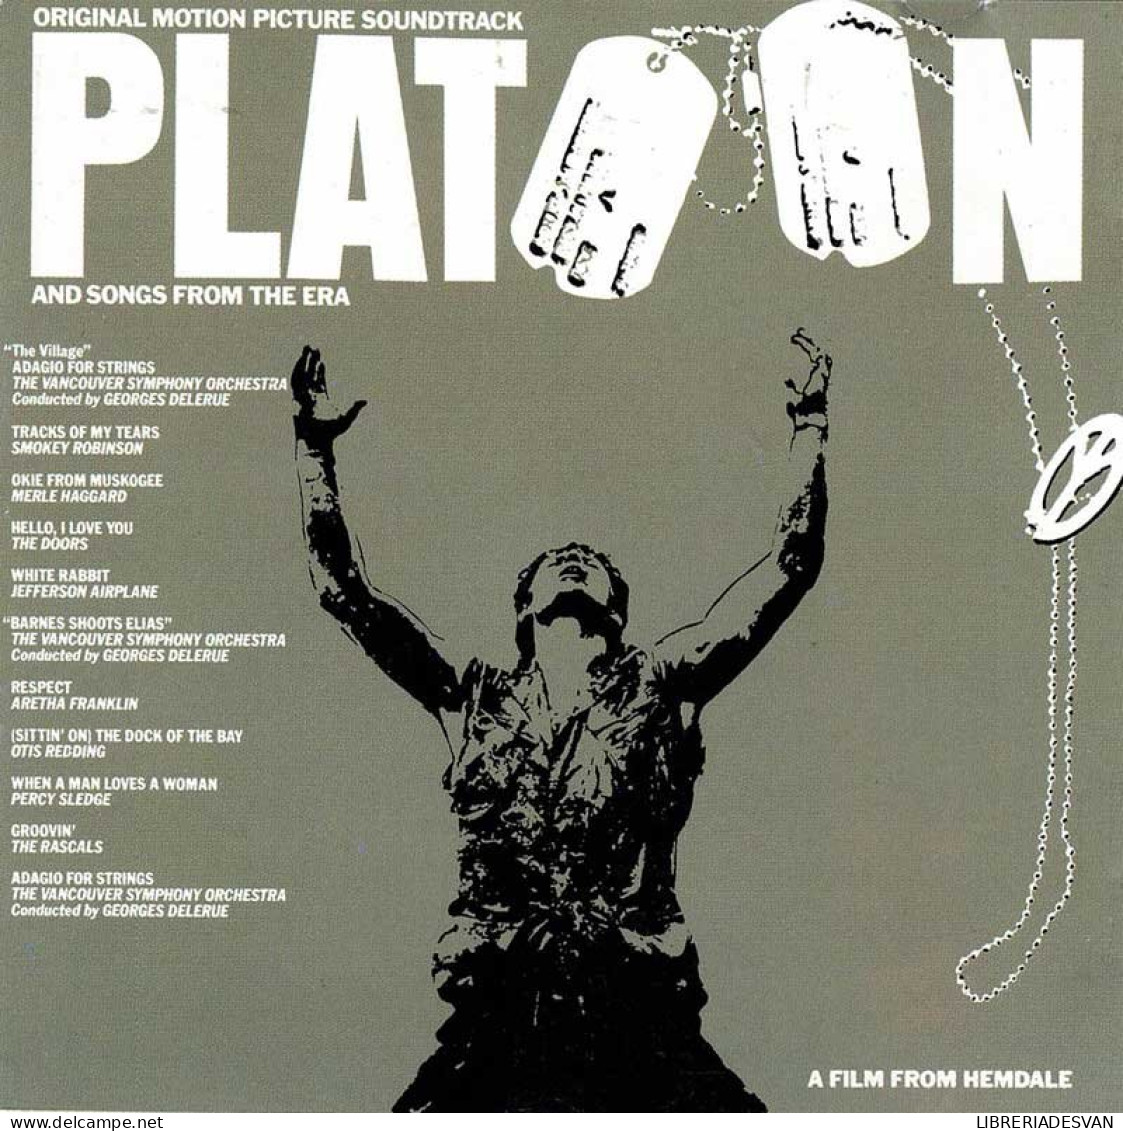 Platoon (Original Motion Picture Soundtrack And Songs From The Era). CD - Musica Di Film